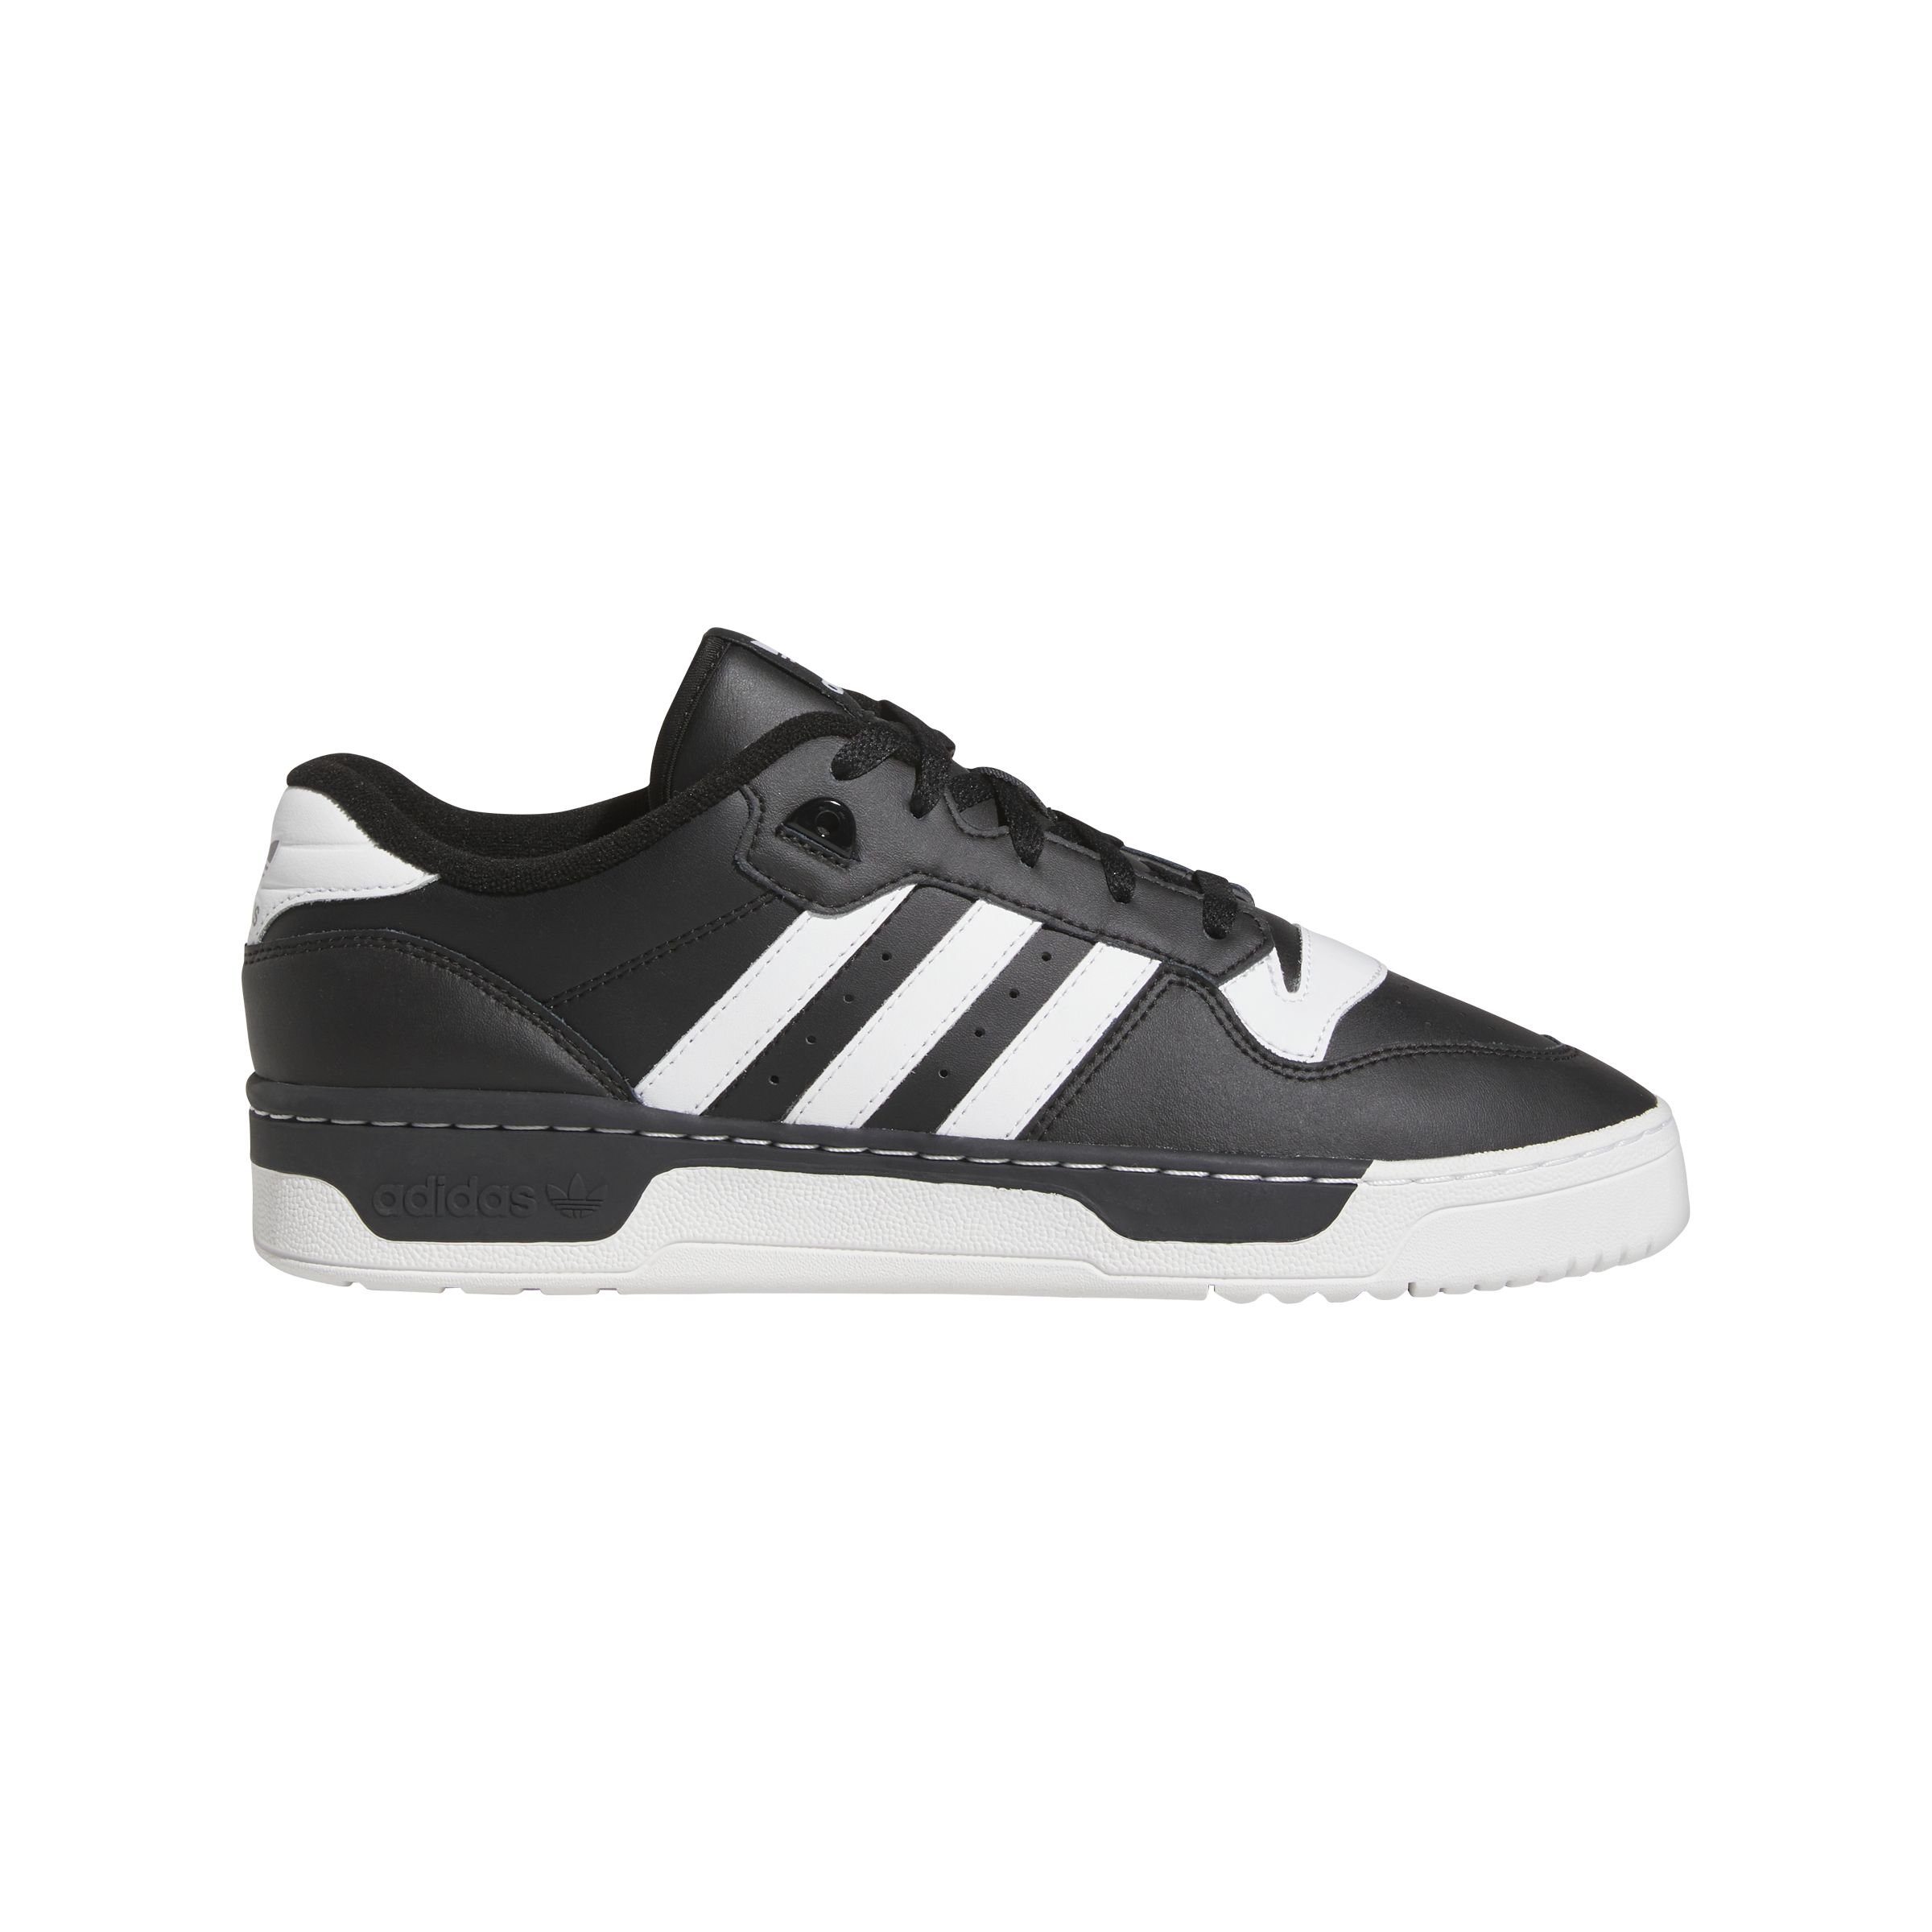 Image of adidas Men's Rivalry Low Basketball Shoes